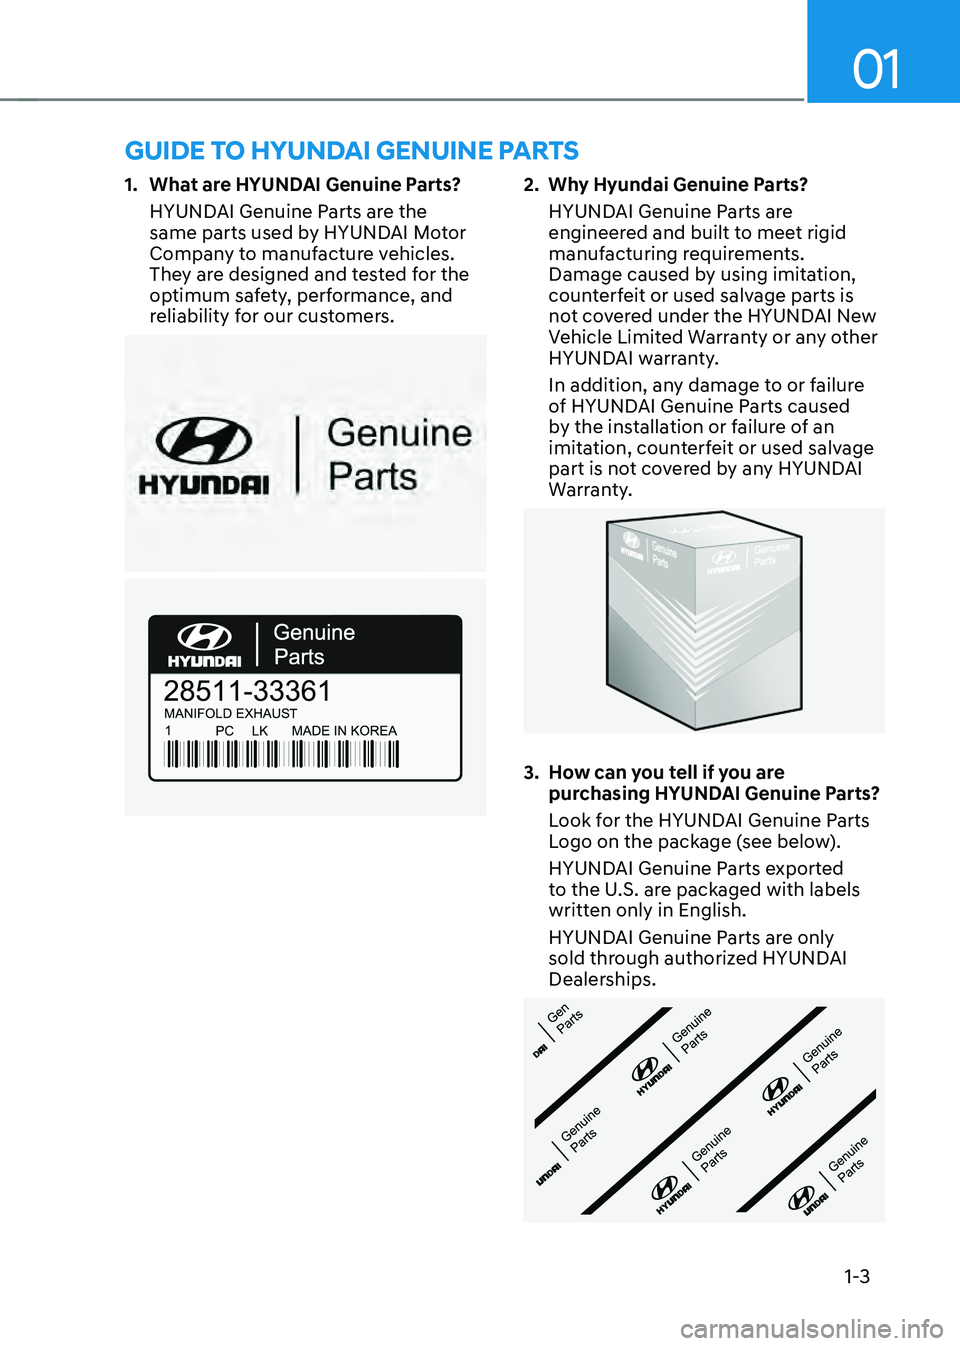 HYUNDAI SONATA HYBRID 2020  Owners Manual 01
1-3
1. What are HYUNDAI Genuine Parts?
HYUNDAI Genuine Parts are the 
same parts used by HYUNDAI Motor 
Company to manufacture vehicles. 
They are designed and tested for the 
optimum safety, perfo